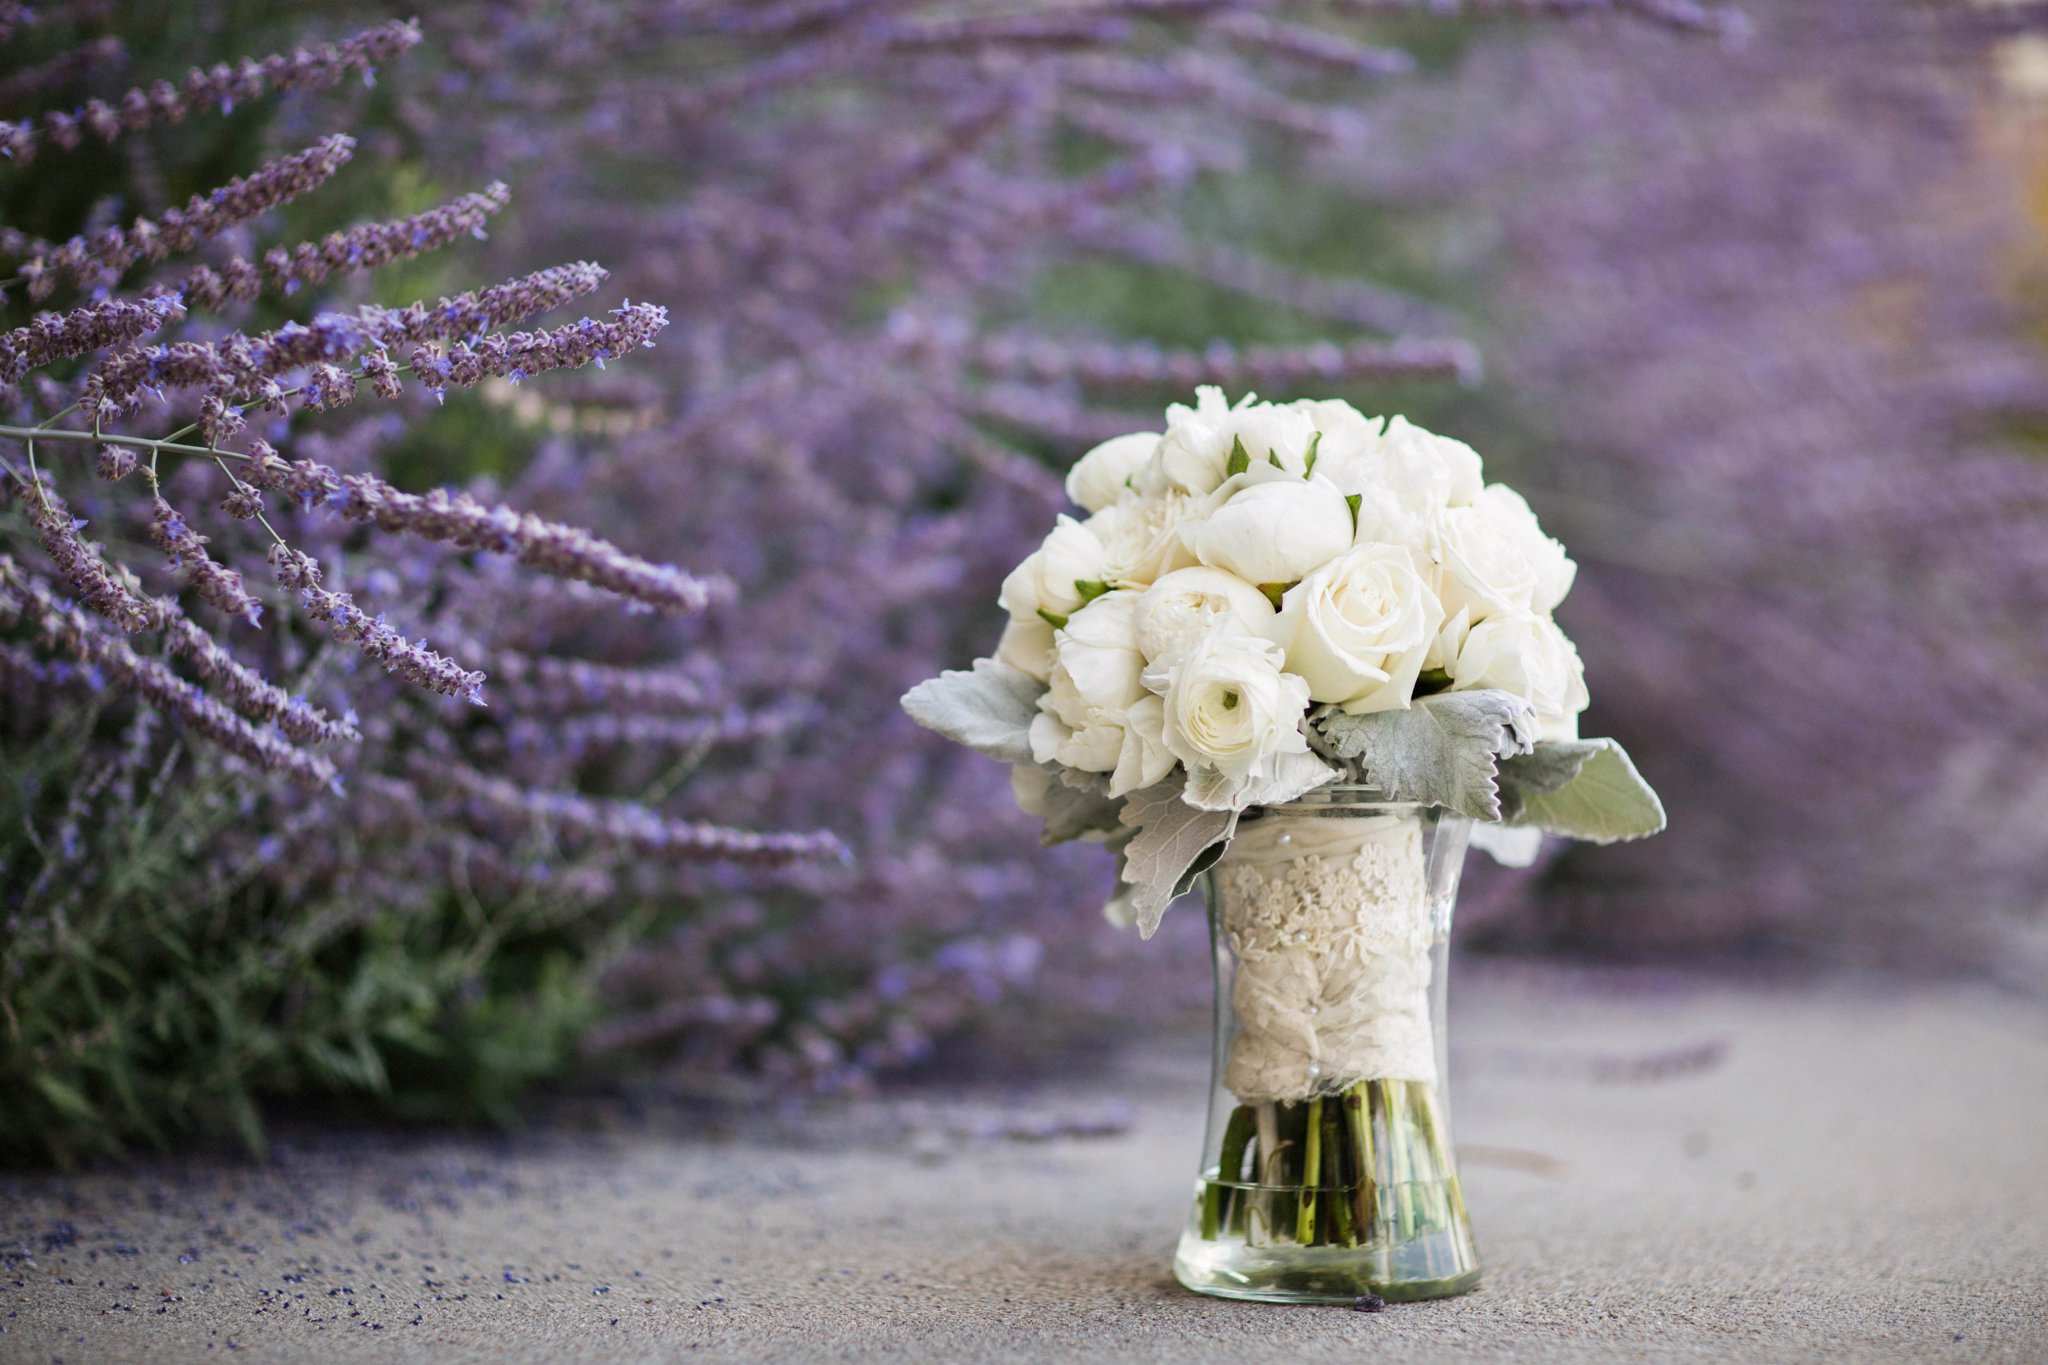 Sioux Falls Wedding Photos | Destination Photographer | Felicia The Photographer | bouquets | white roses | dusty miller | Peonies | Lavender